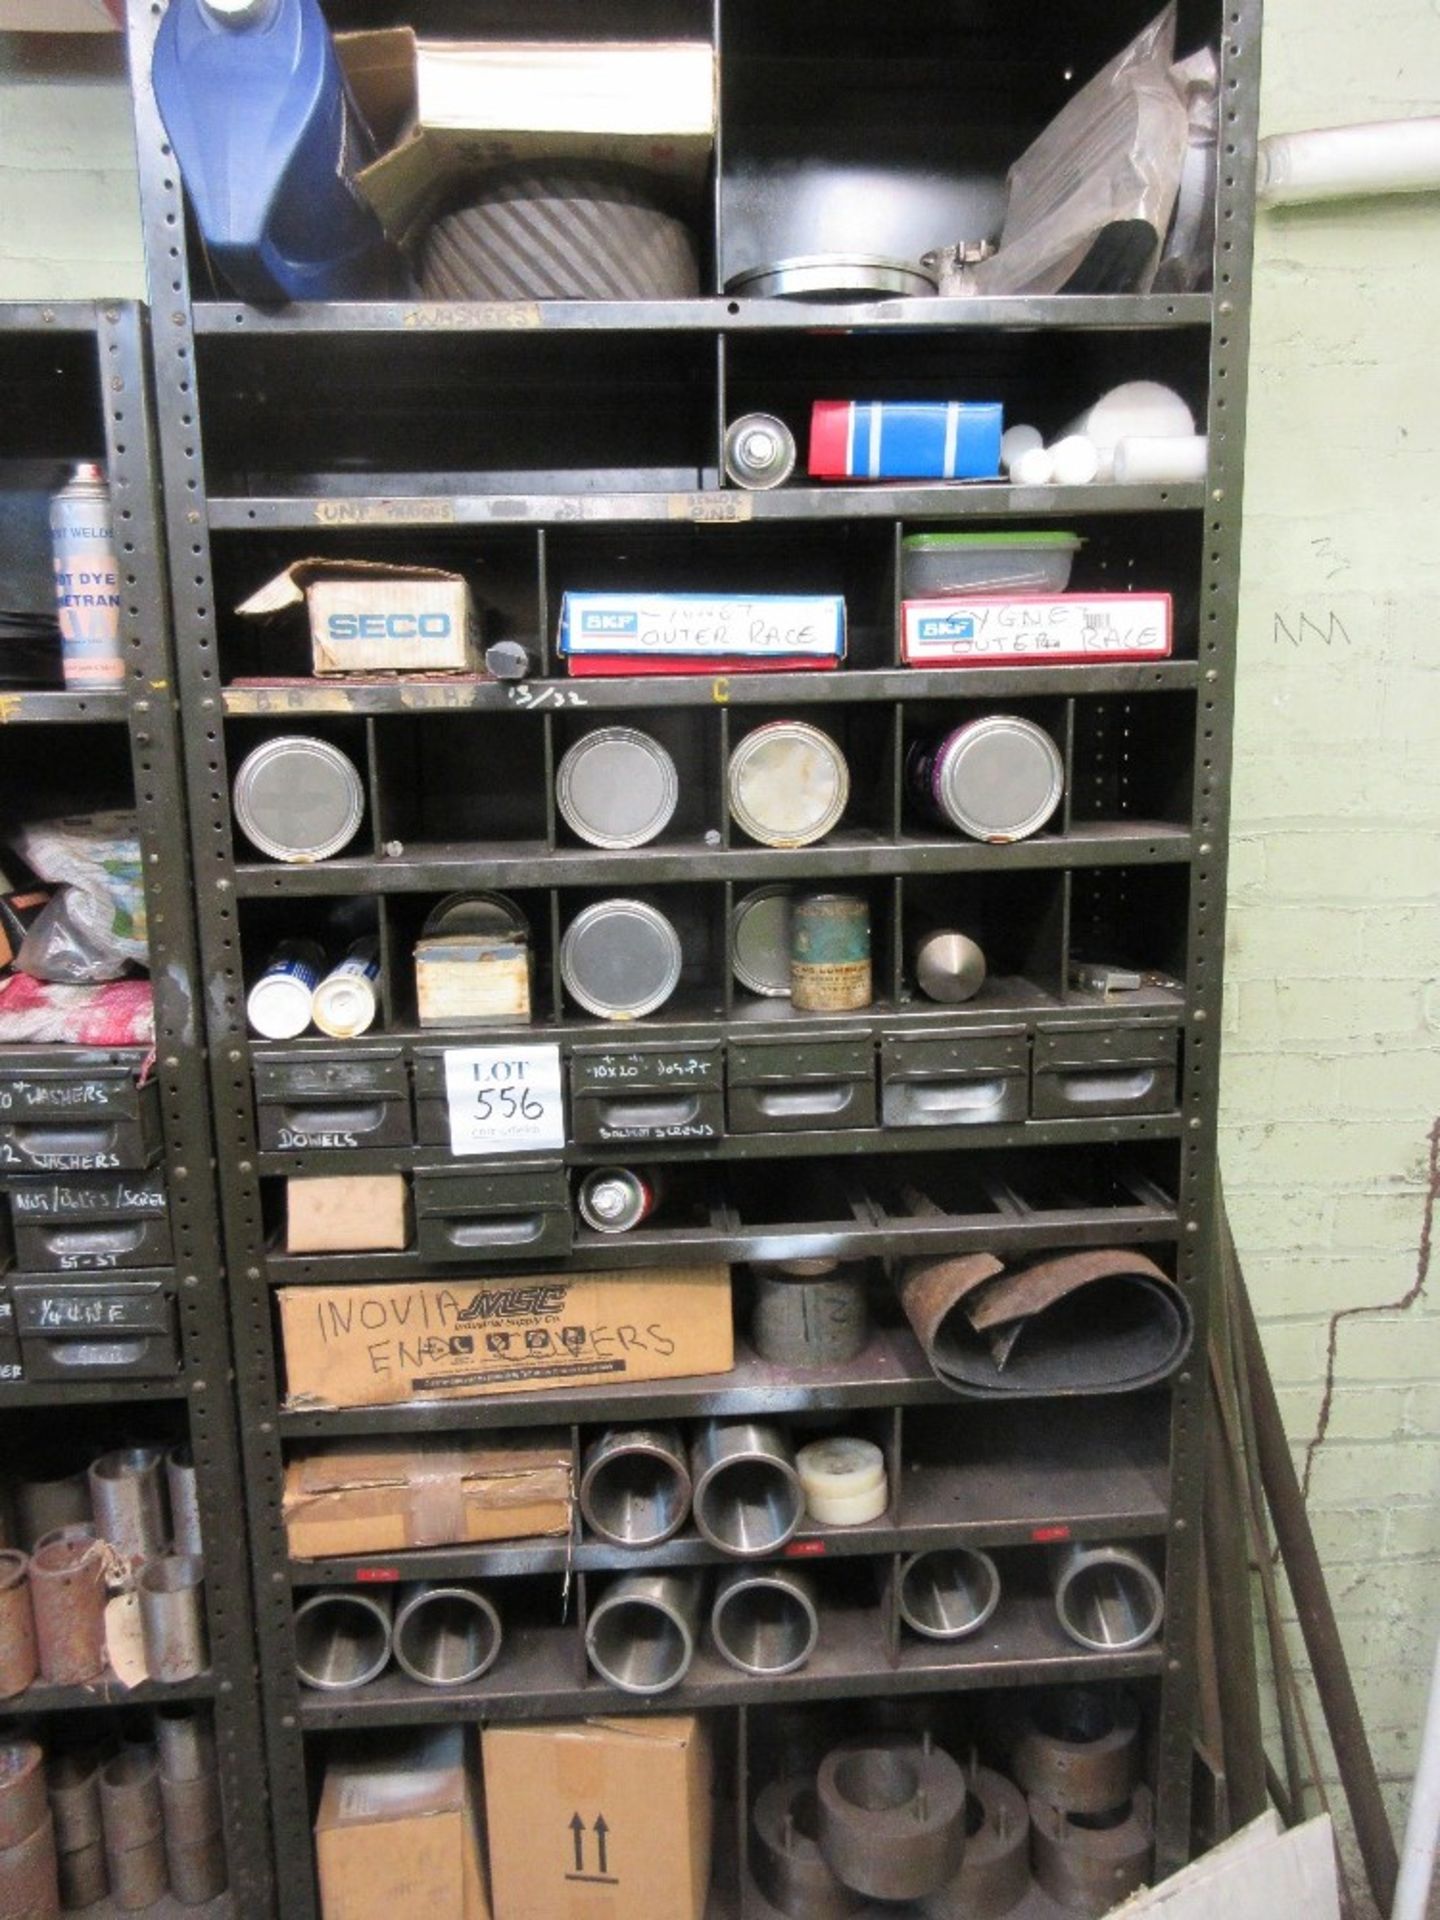 Cabinet containing Harden sleeves, cans of grease and various screws and fittings